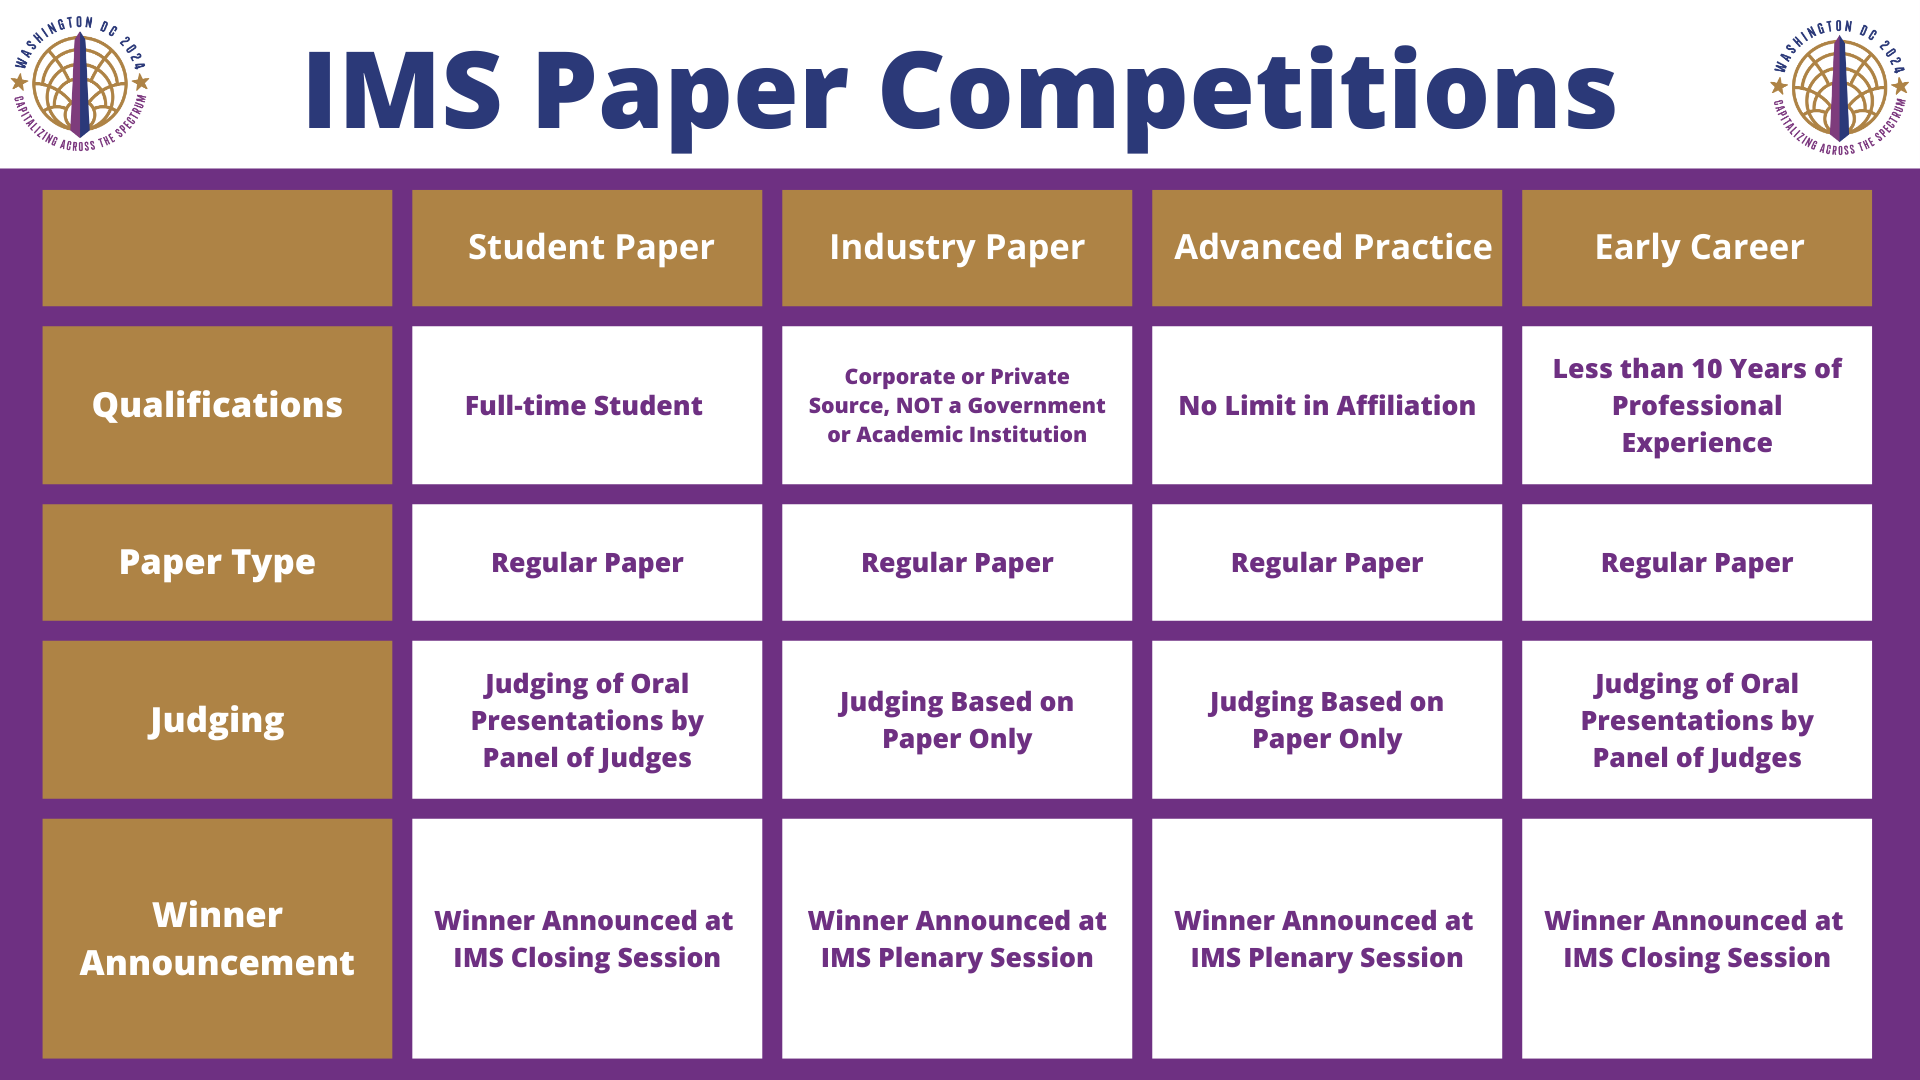 IMS Paper Competitions